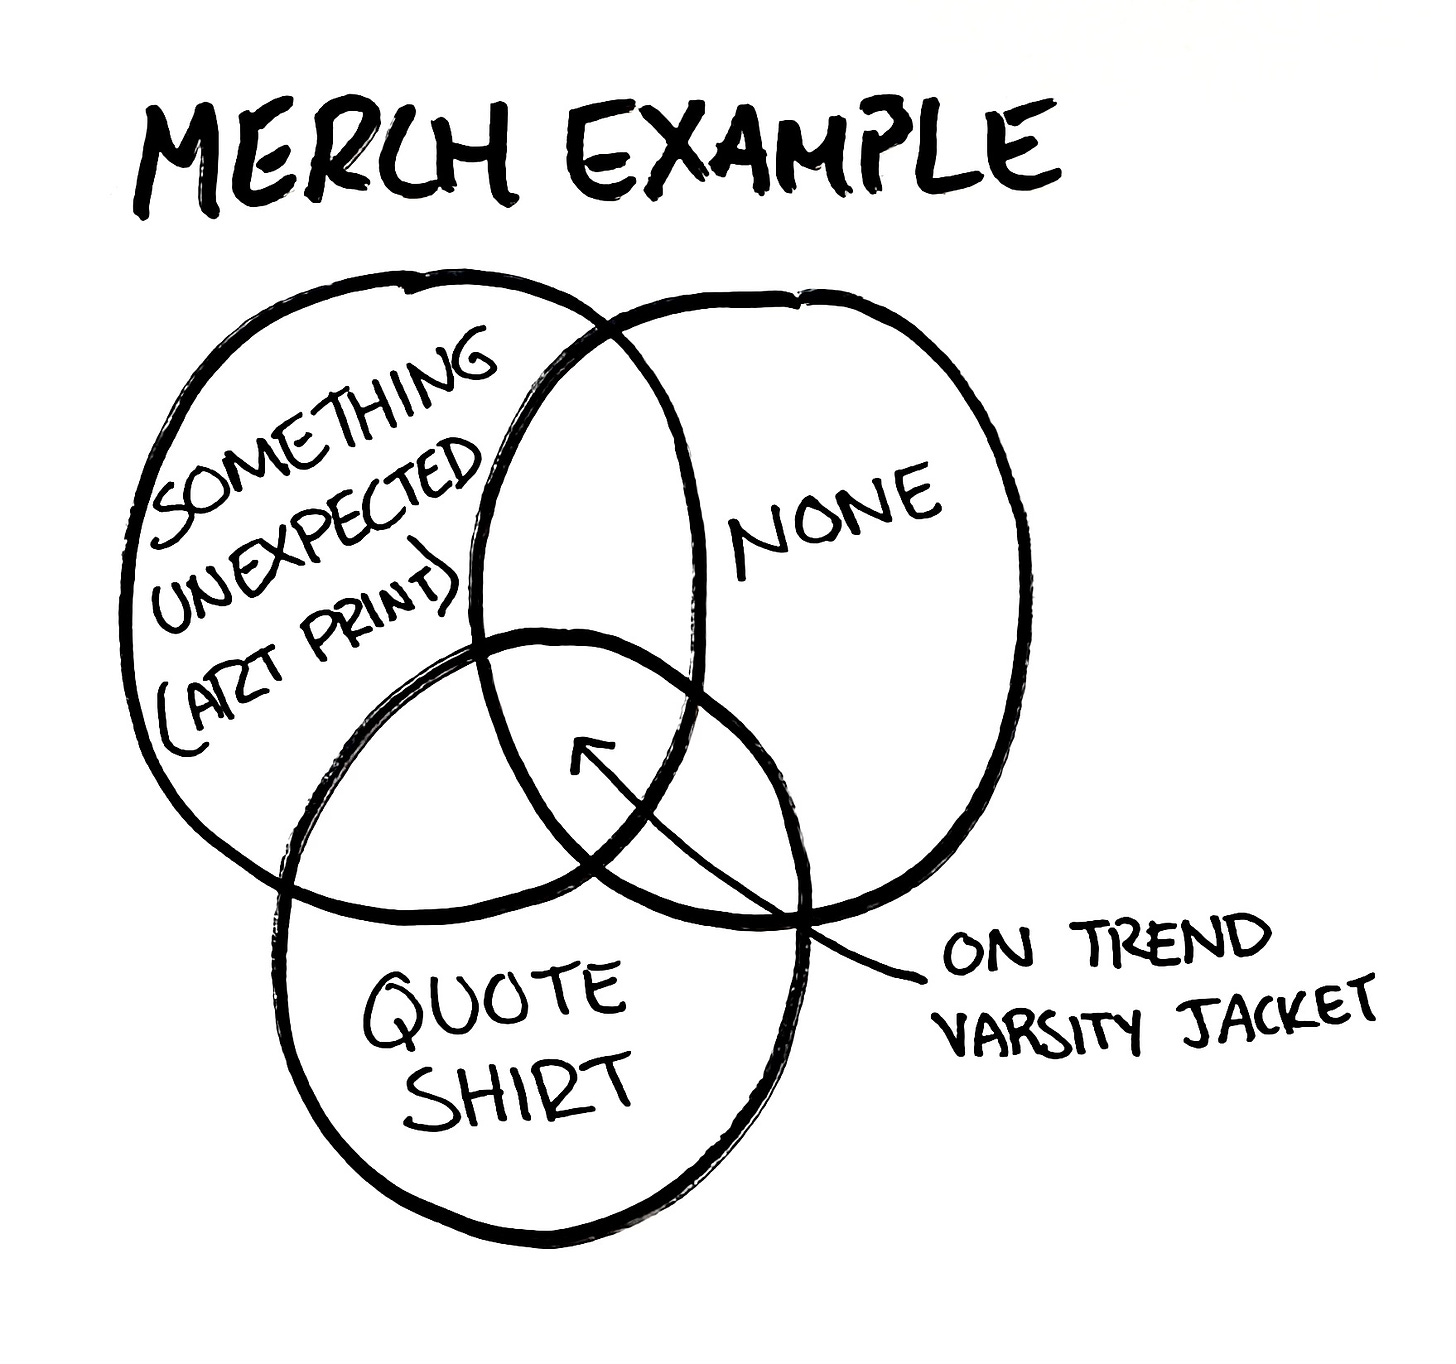 a hand drawn venn diagram with 3 circles like above titled Merch Example. The (category) leadership circle now says something unexpected (art print). The analytic iteration & data one now says none. And the storytelling & messaging one now says quote shirt. The central overlap arrow now has the label on trend varsity jacket.